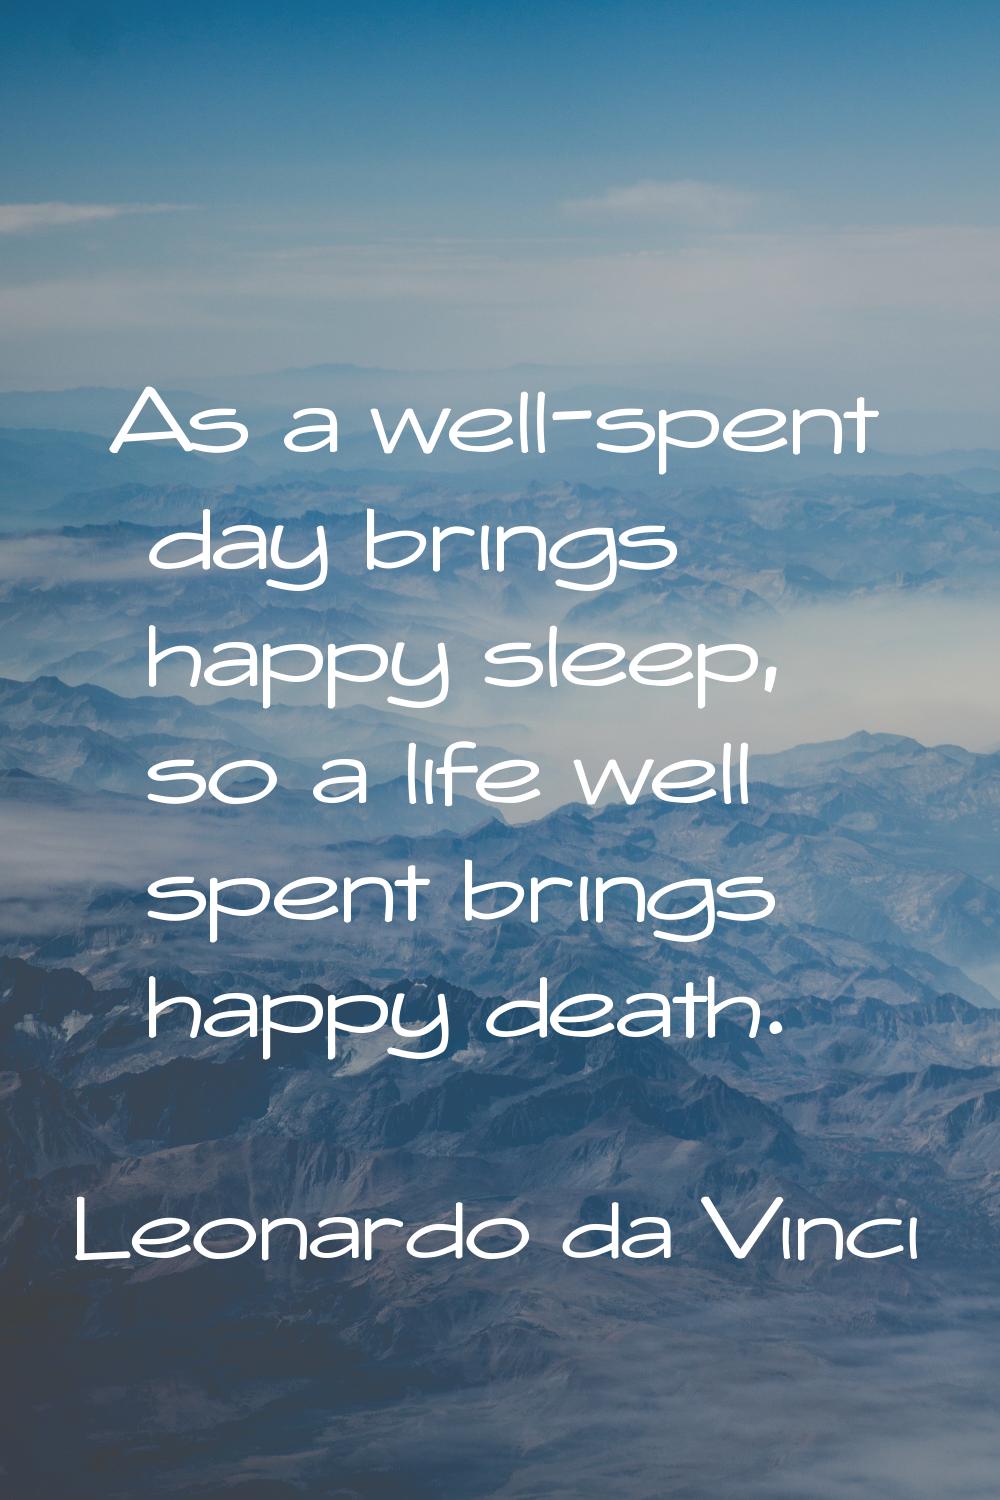 As a well-spent day brings happy sleep, so a life well spent brings happy death.